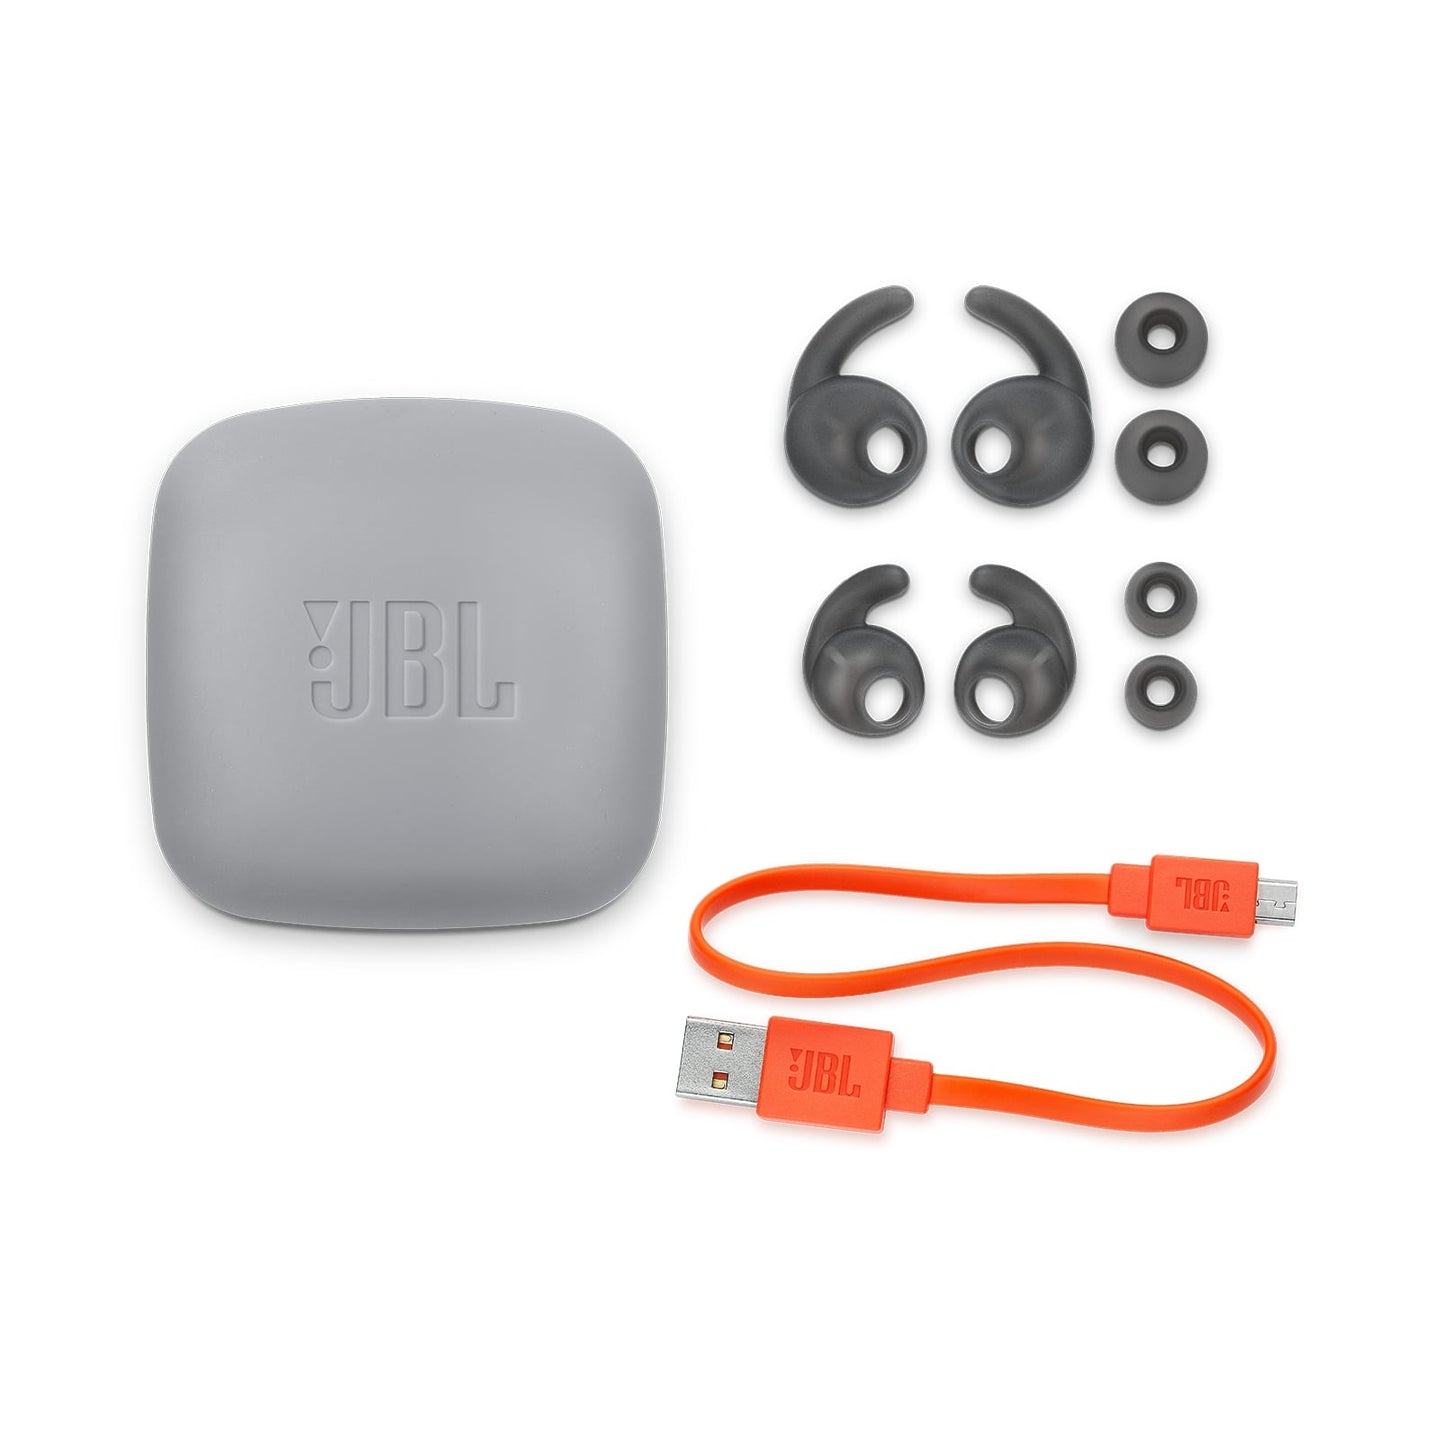 JBL Reflect Contour Wireless Bluetooth Sports Earphones with IPX5 Water Resistance, 10 Hr Total Playtime, and Ergonomic Interchangeable Ear Tips (Black, Blue, Green, White)